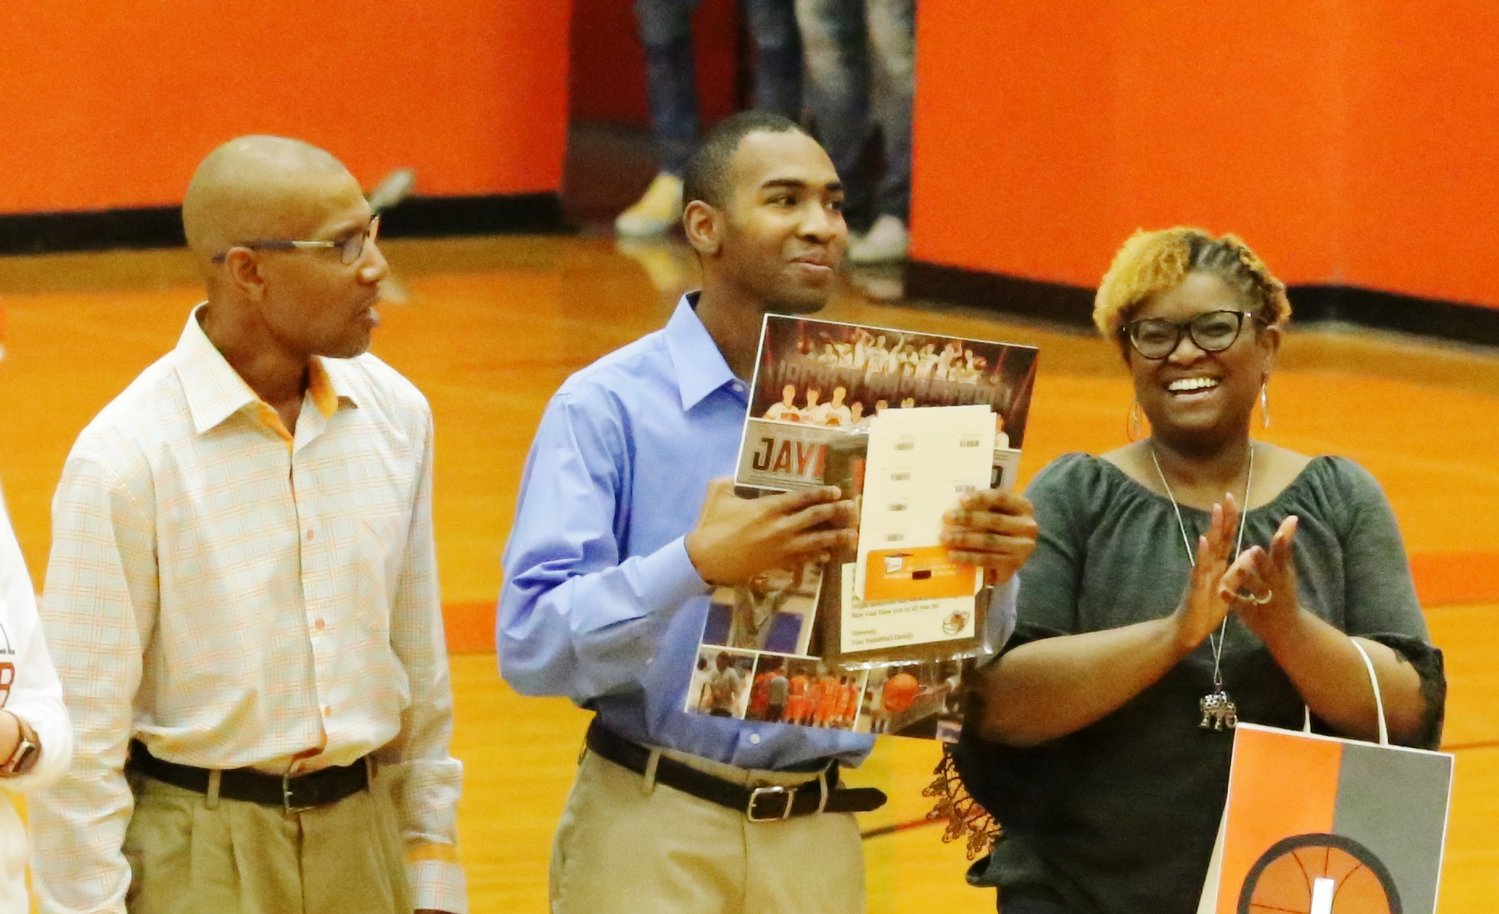 Jaylon Harper with his parents Toni and Royce Kennedy are recognized at last week’s senior night in Mineola.